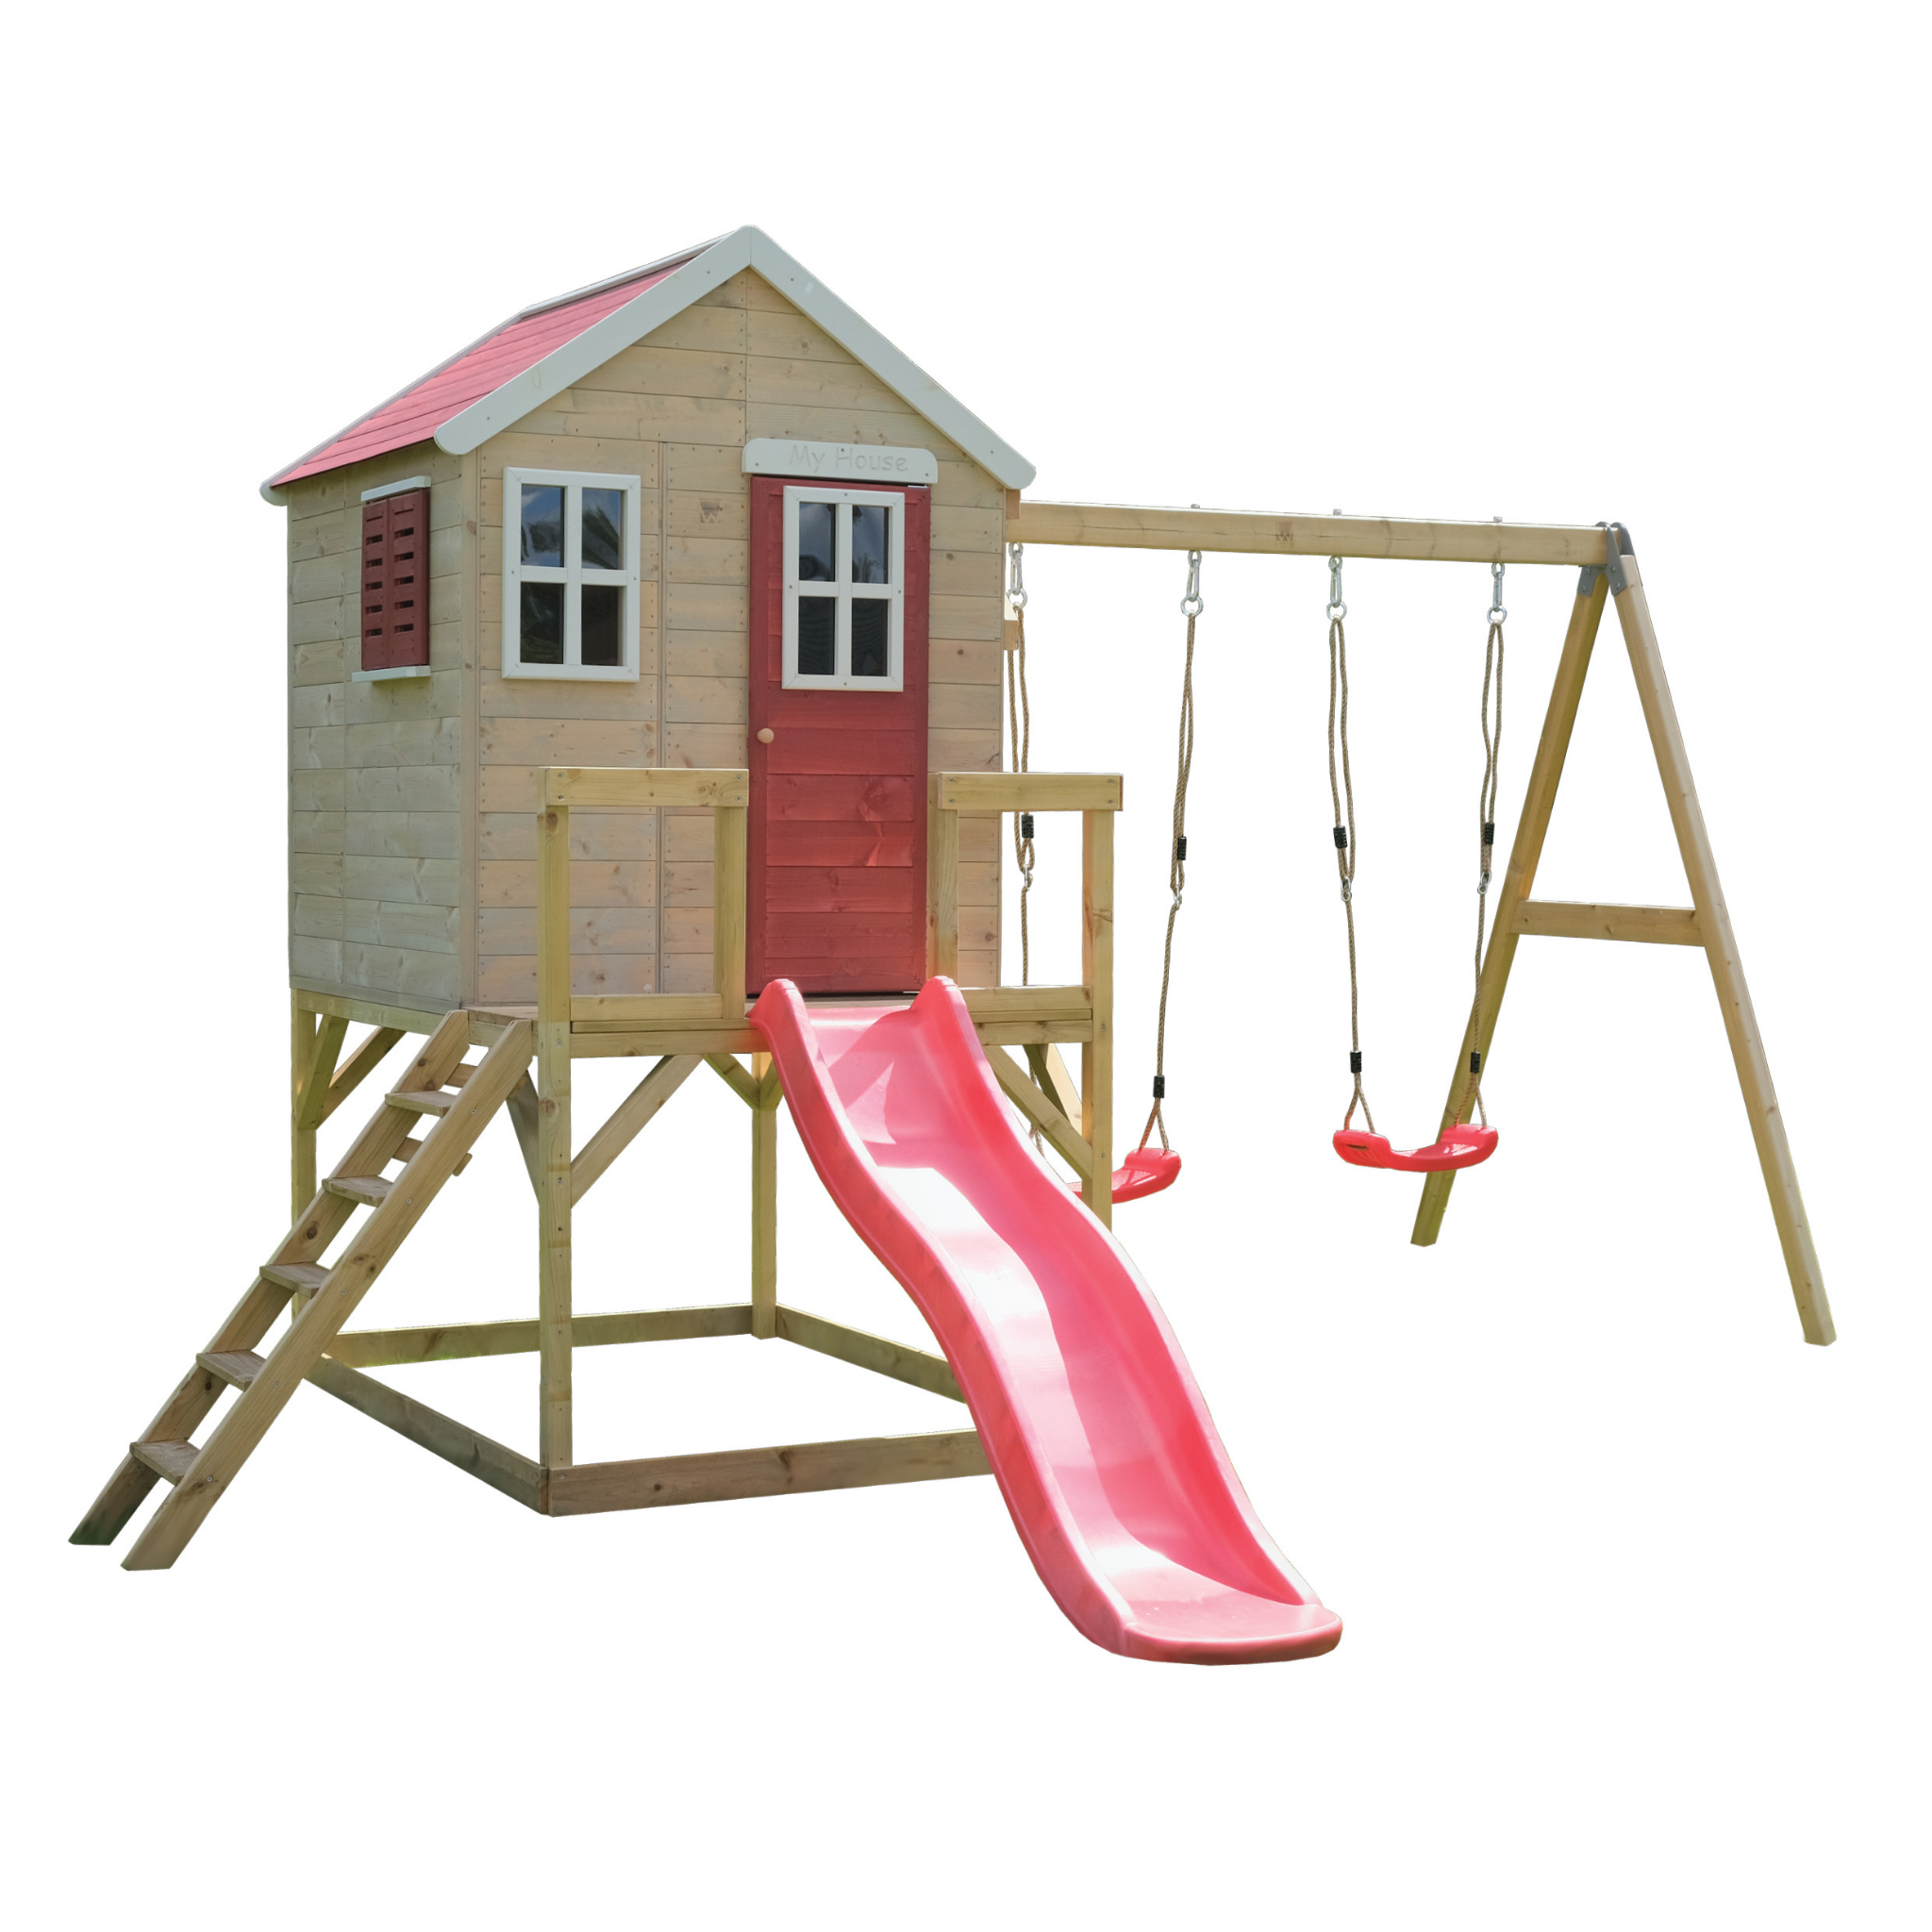 M28 My Lodge with Platform, Slide and Double Swing